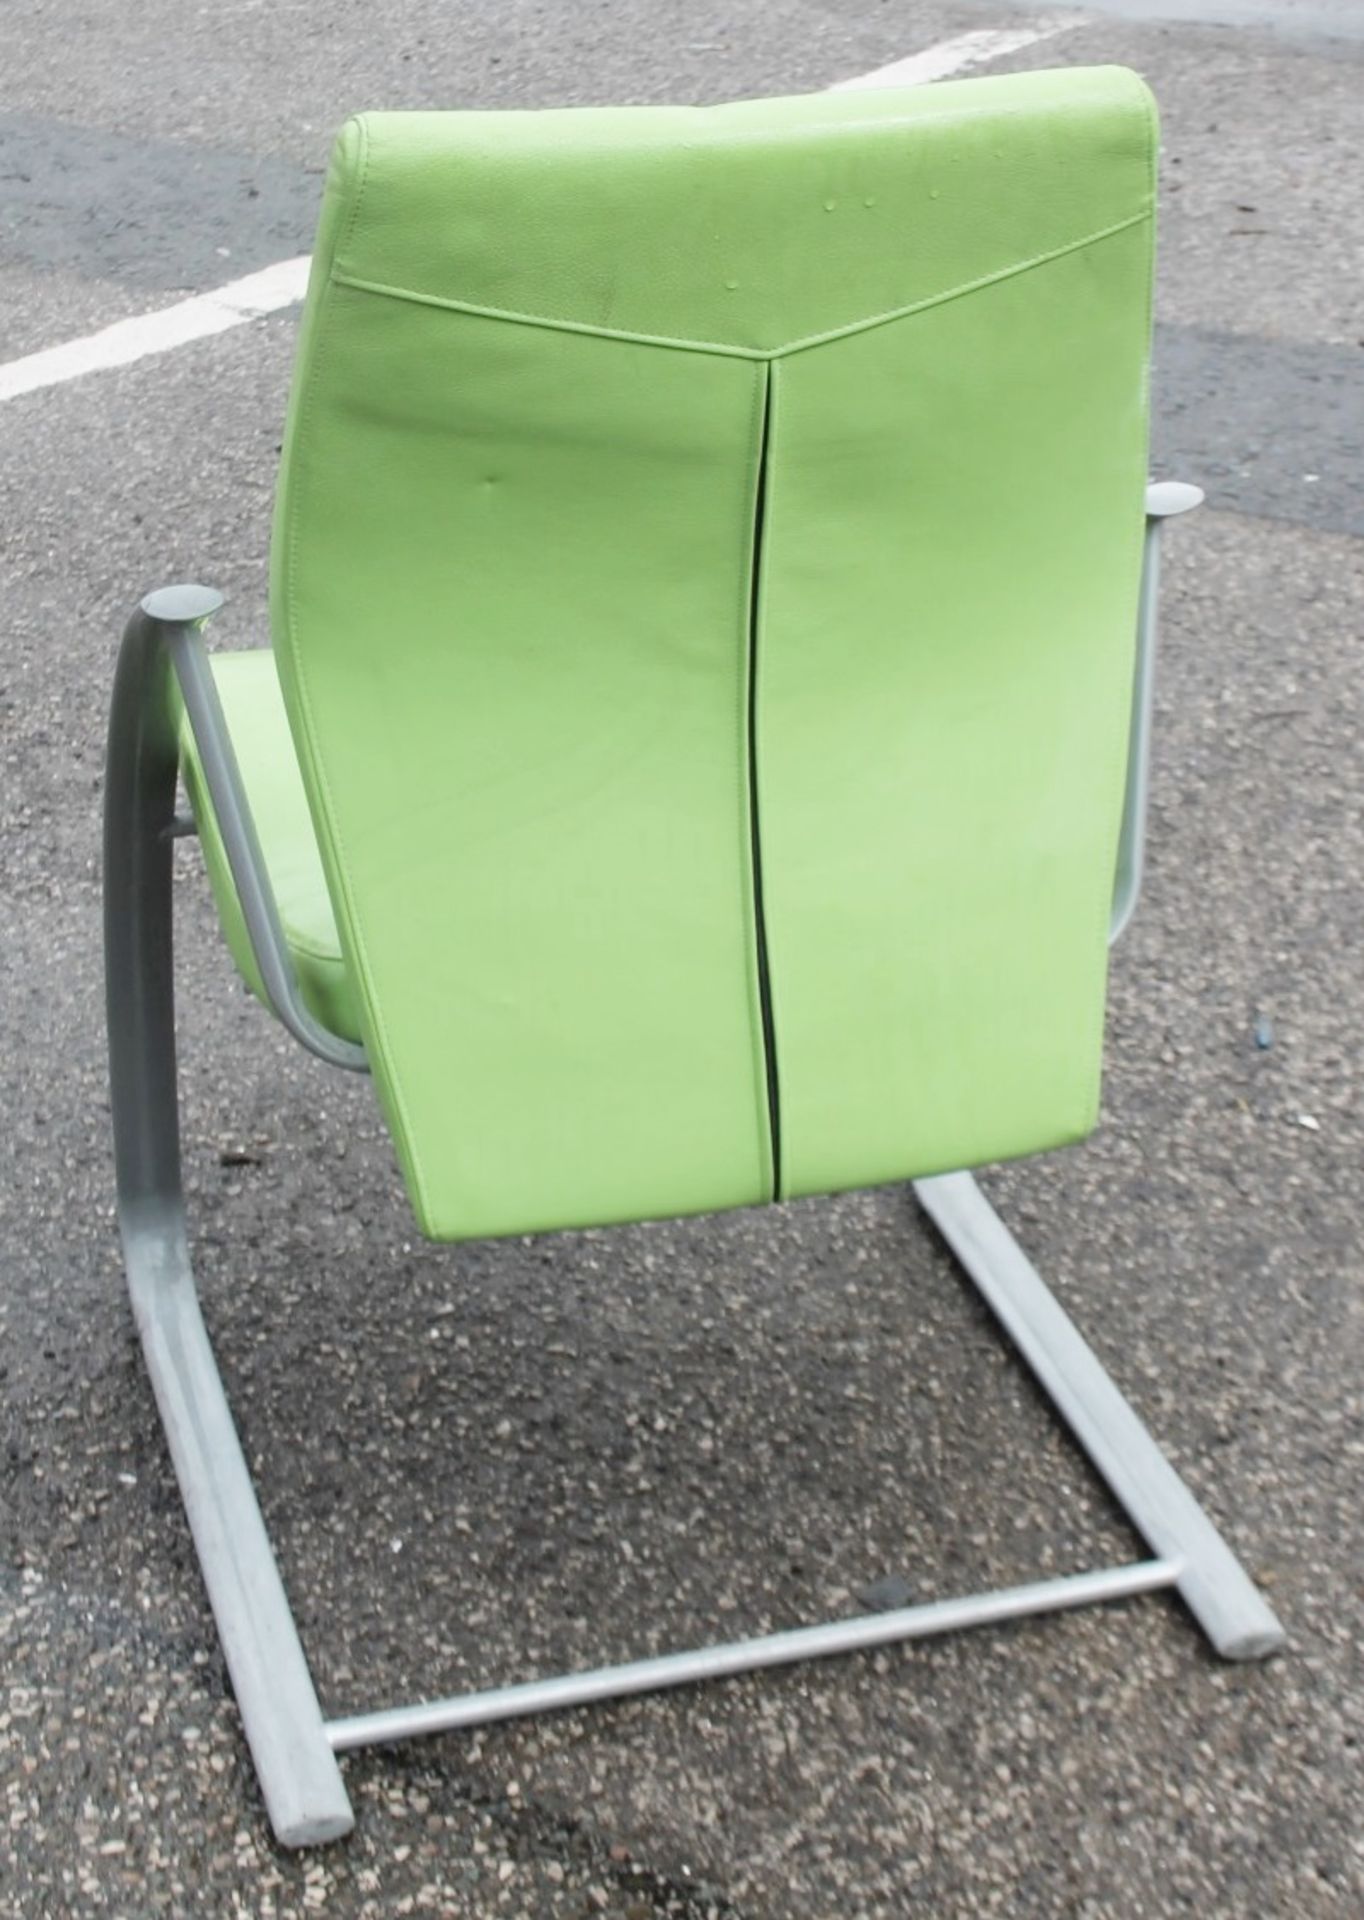 1 x VERCO Branded Cantilever Chair Upholstered In A Lime Faux Leather - Removed From An Executive - Image 3 of 5